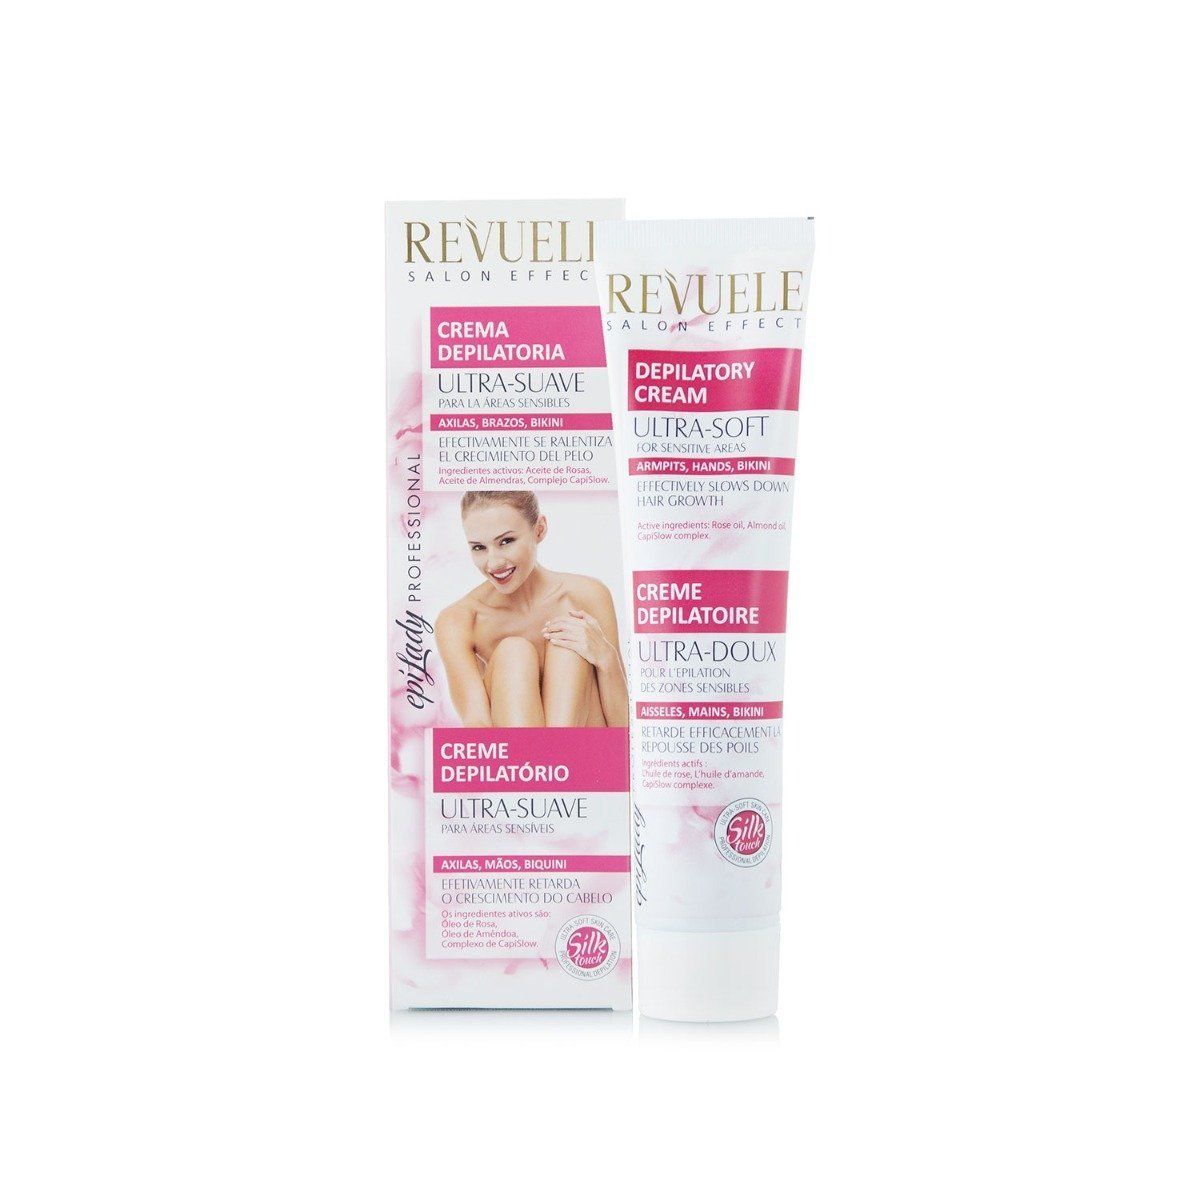 Revuele Ultra Soft Hair Removal Cream For Sensitive Areas With Rose Oil, Almond Oils And Capislow Complex